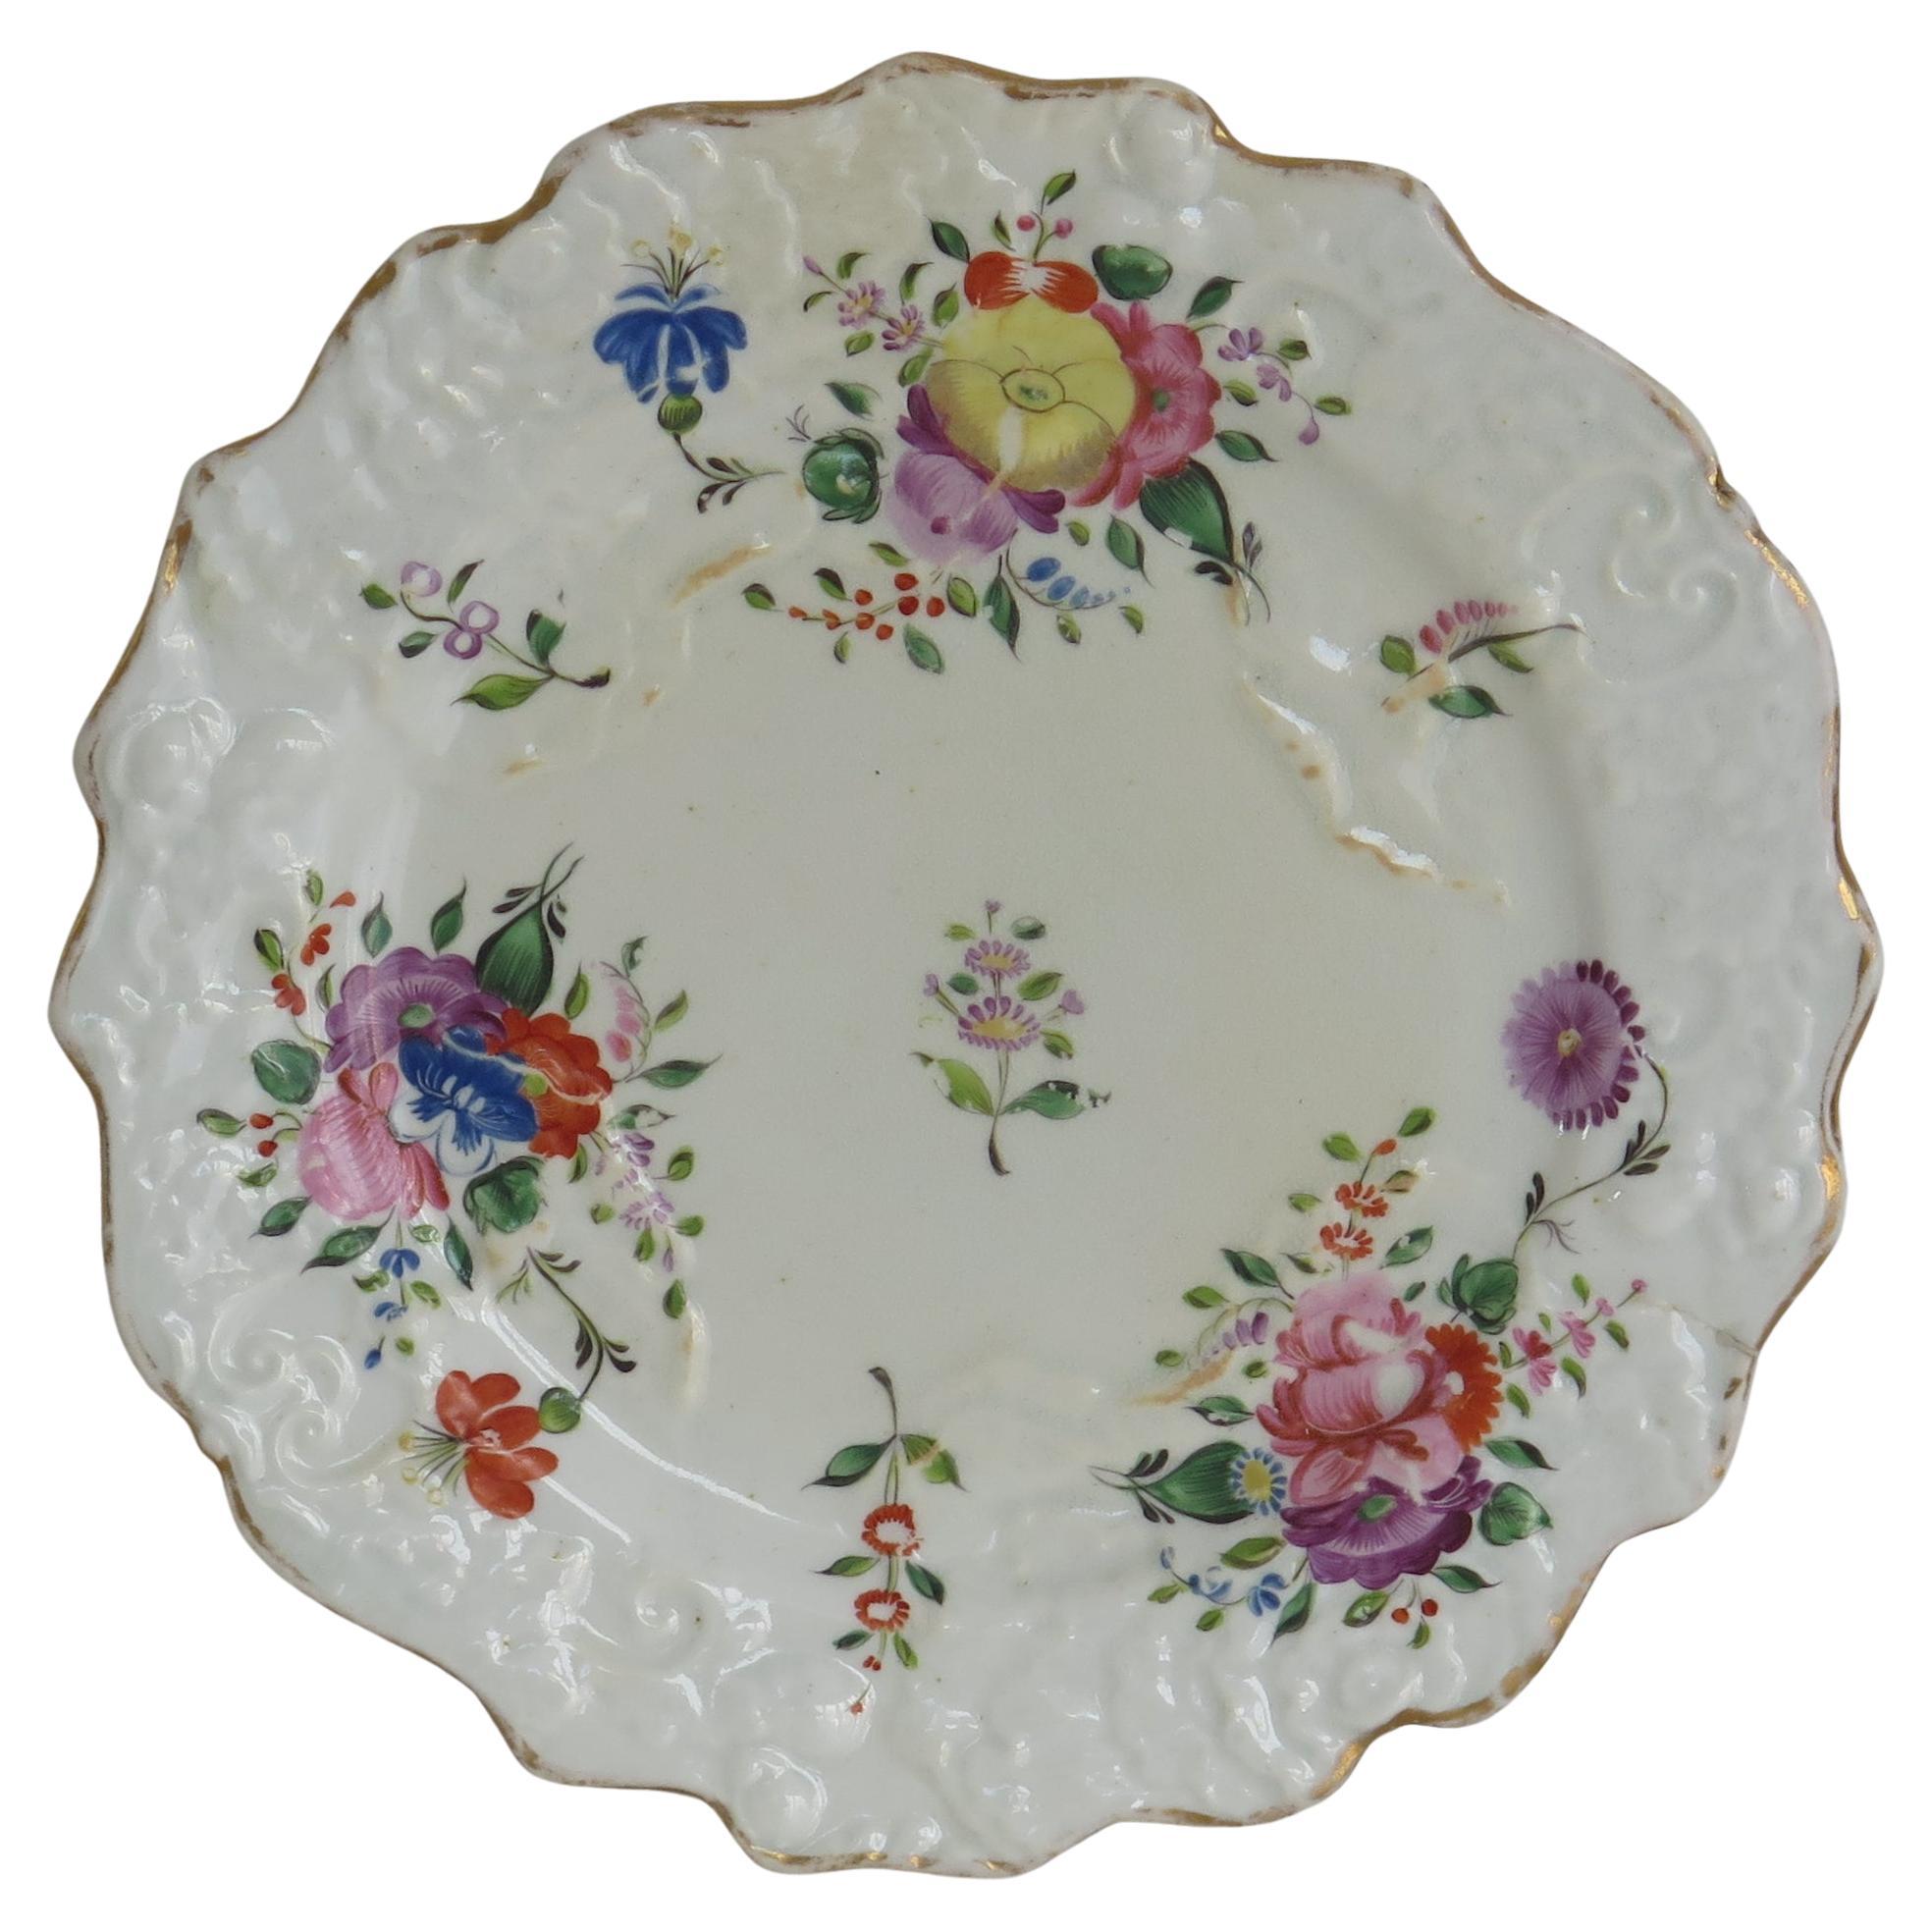 Mason's Porcelain Plate Hand Painted in Central Spray Mixed Border Ptn, Ca 1815